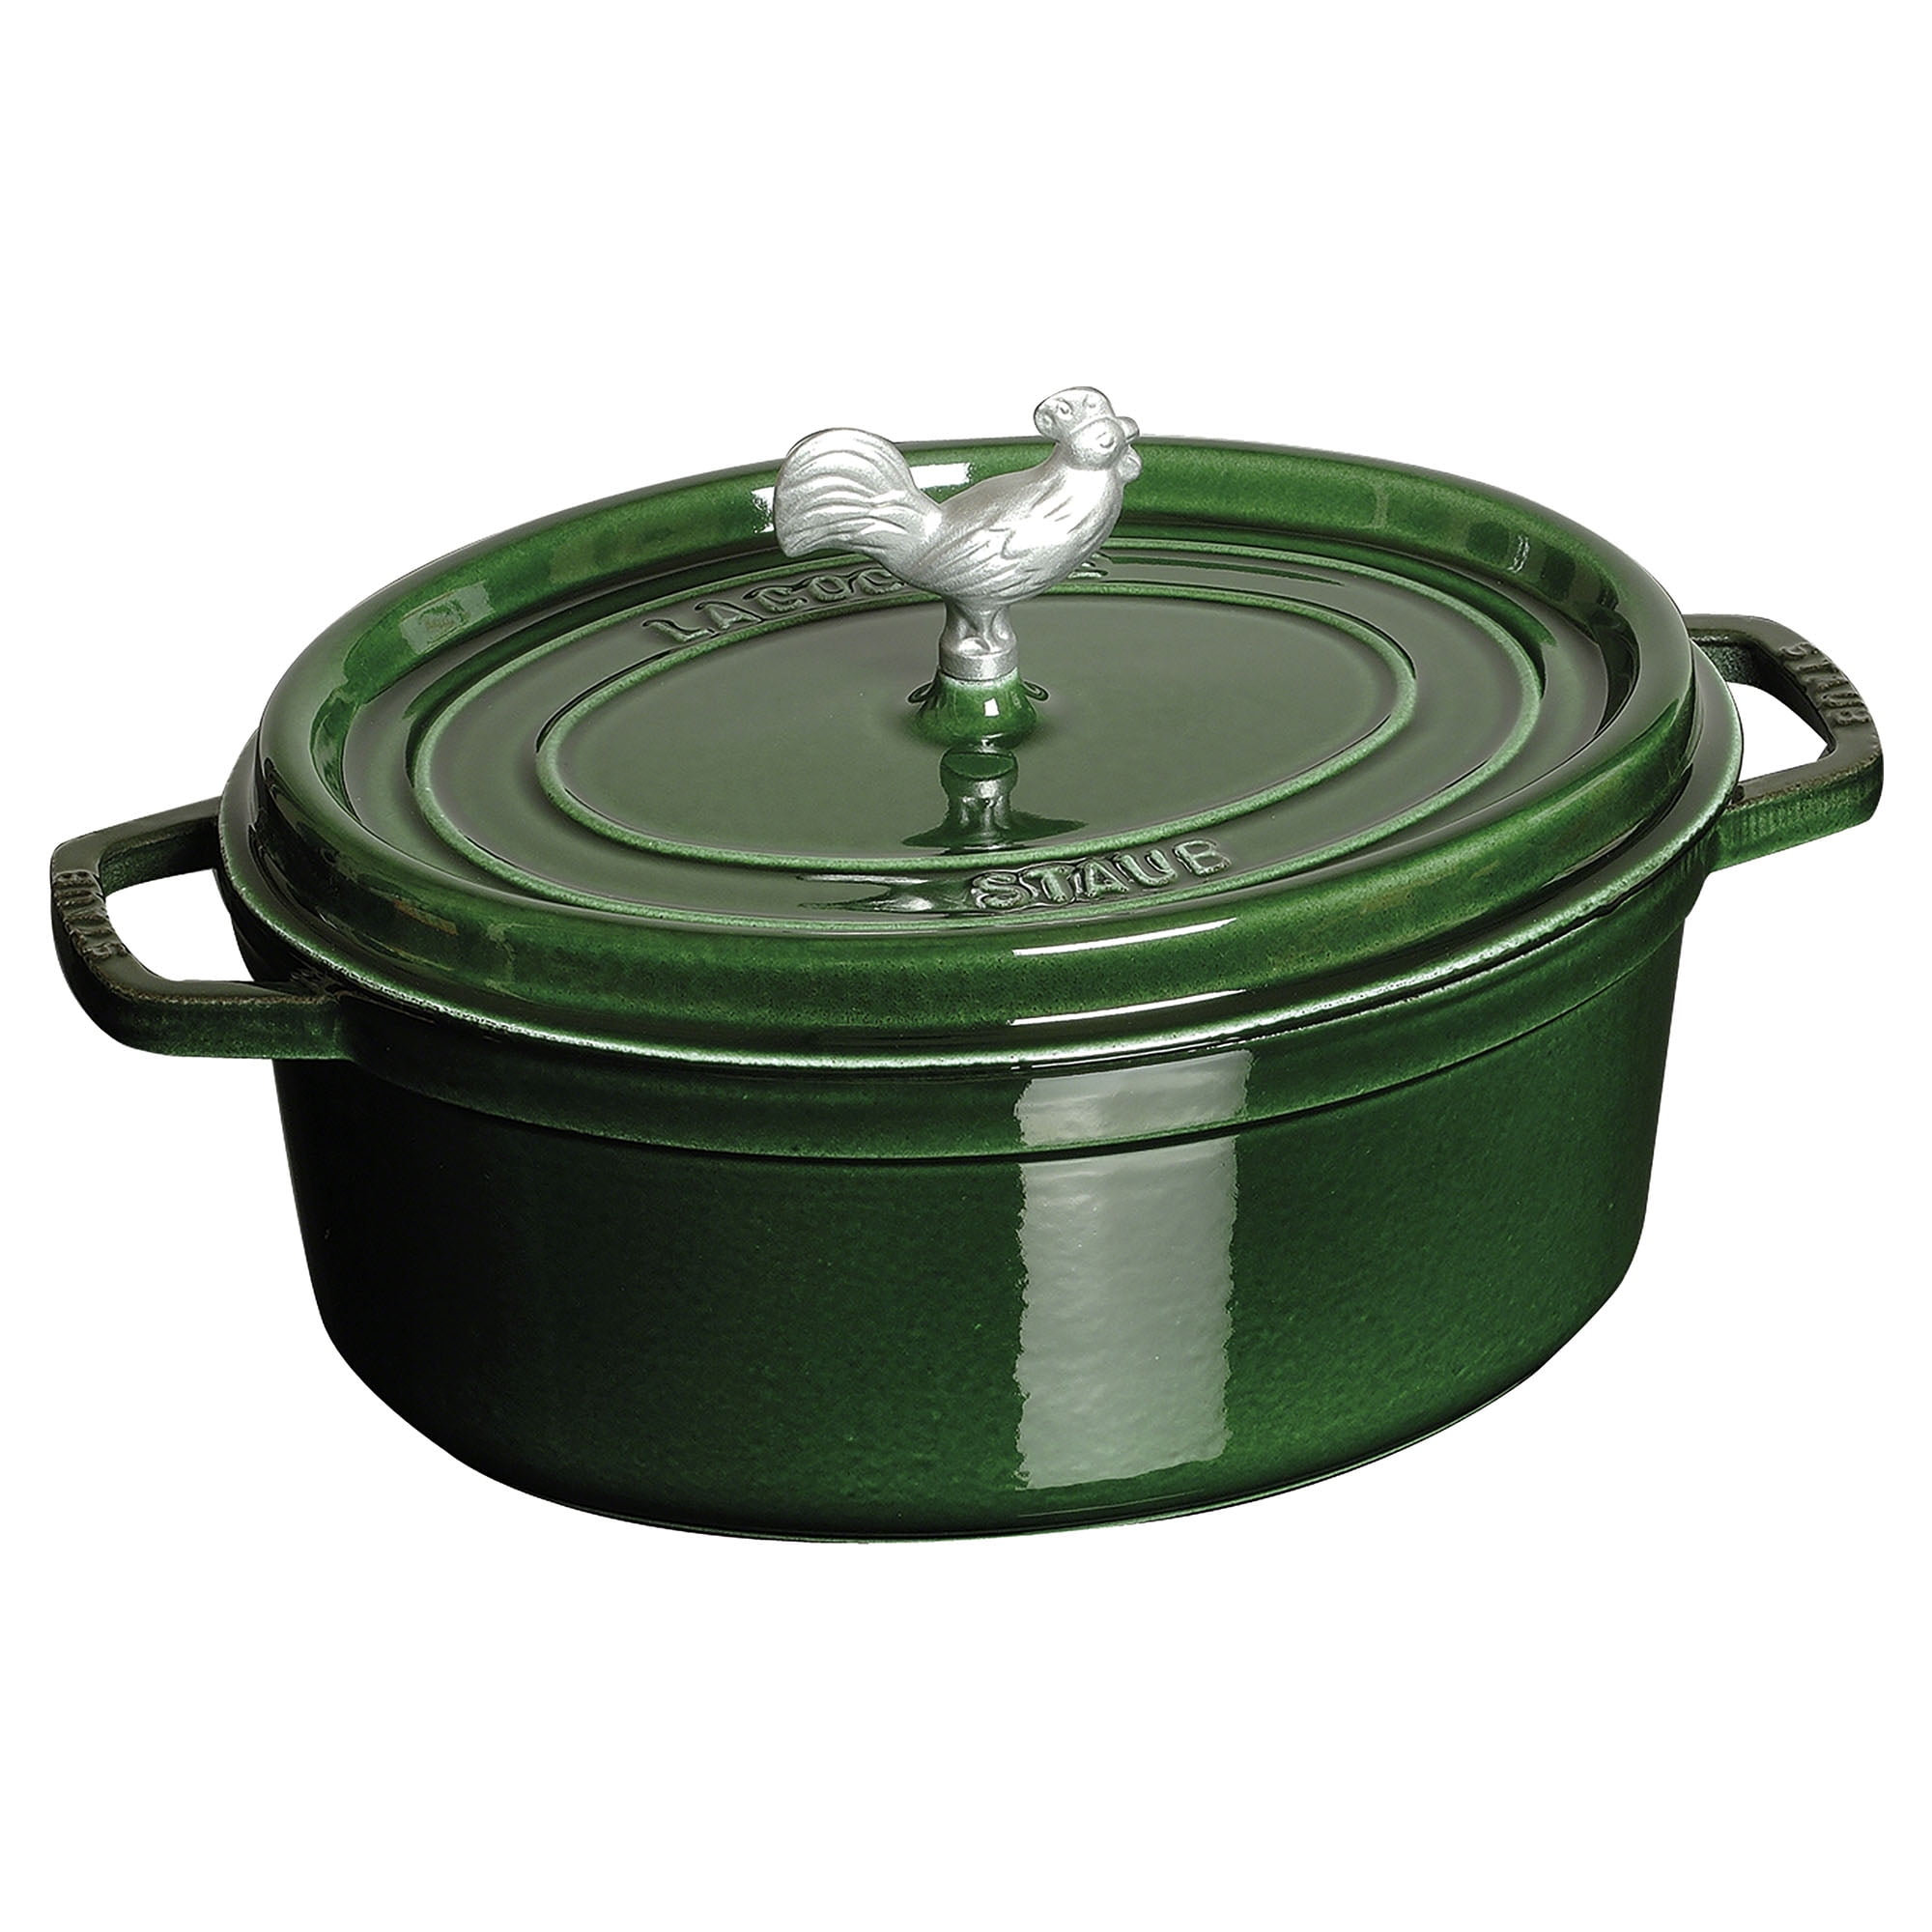 Chicken Staub 5qt Cast Iron Cocotte Enameled Hen Rooster Dutch Oven Green  *CRACK